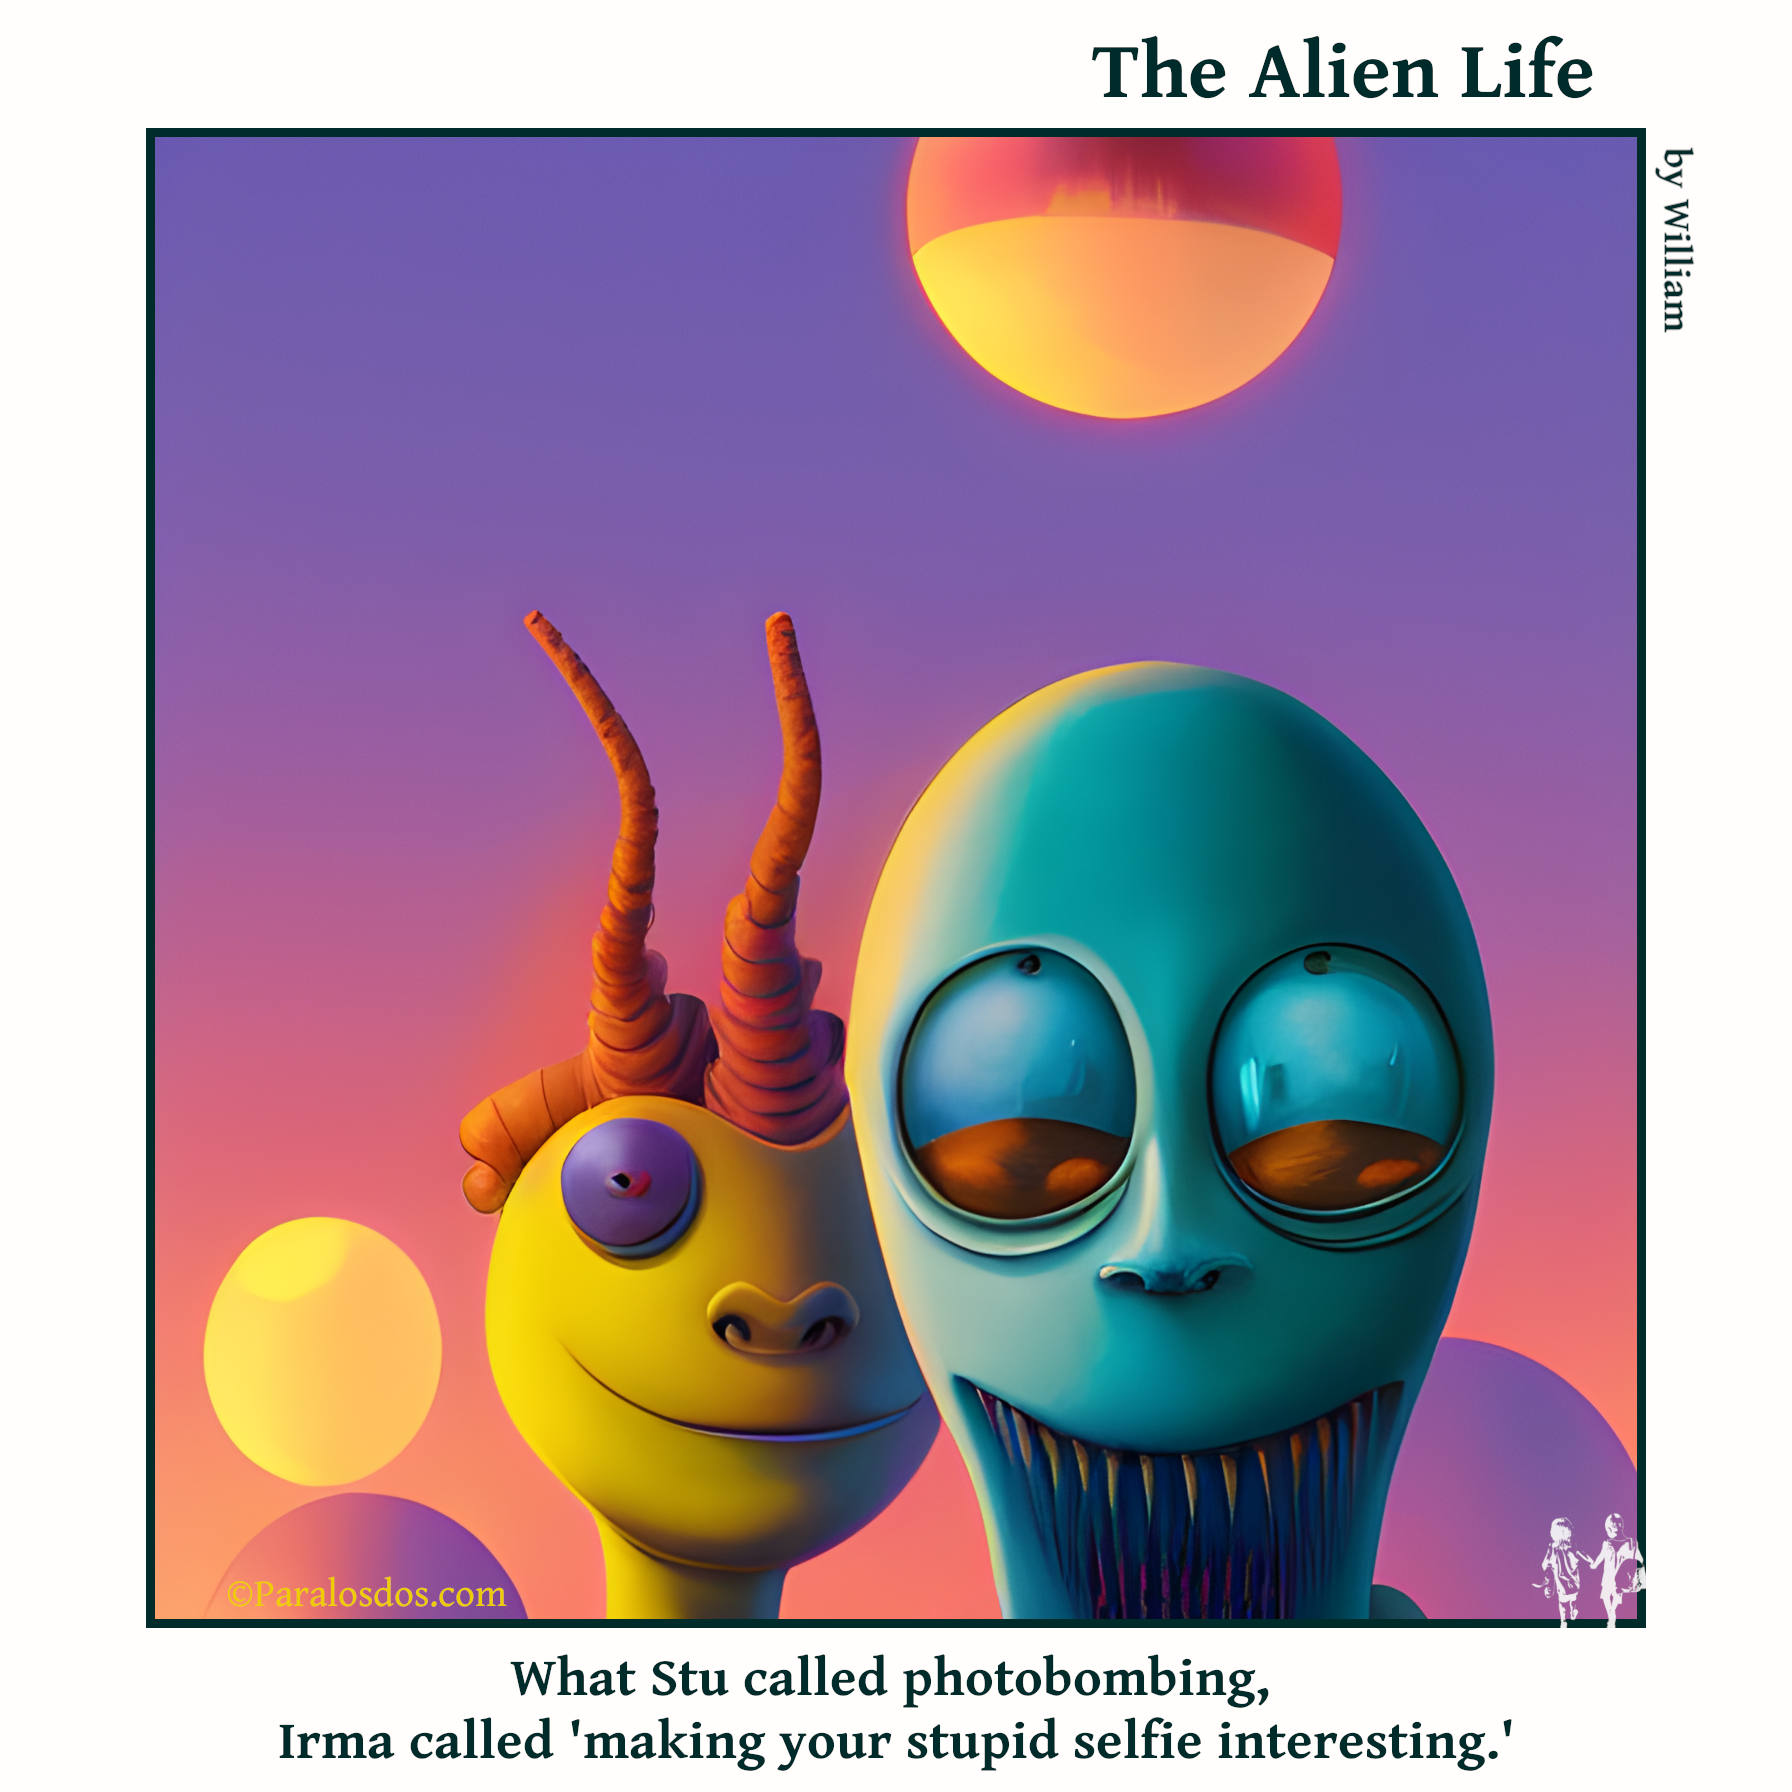 The Alien Life, one panel Comic. An alien is taking a selfie, and behind him another alien has sneaked into the picture. The caption reads: What Stu called photobombing, Irma called 'making your stupid selfie interesting.'